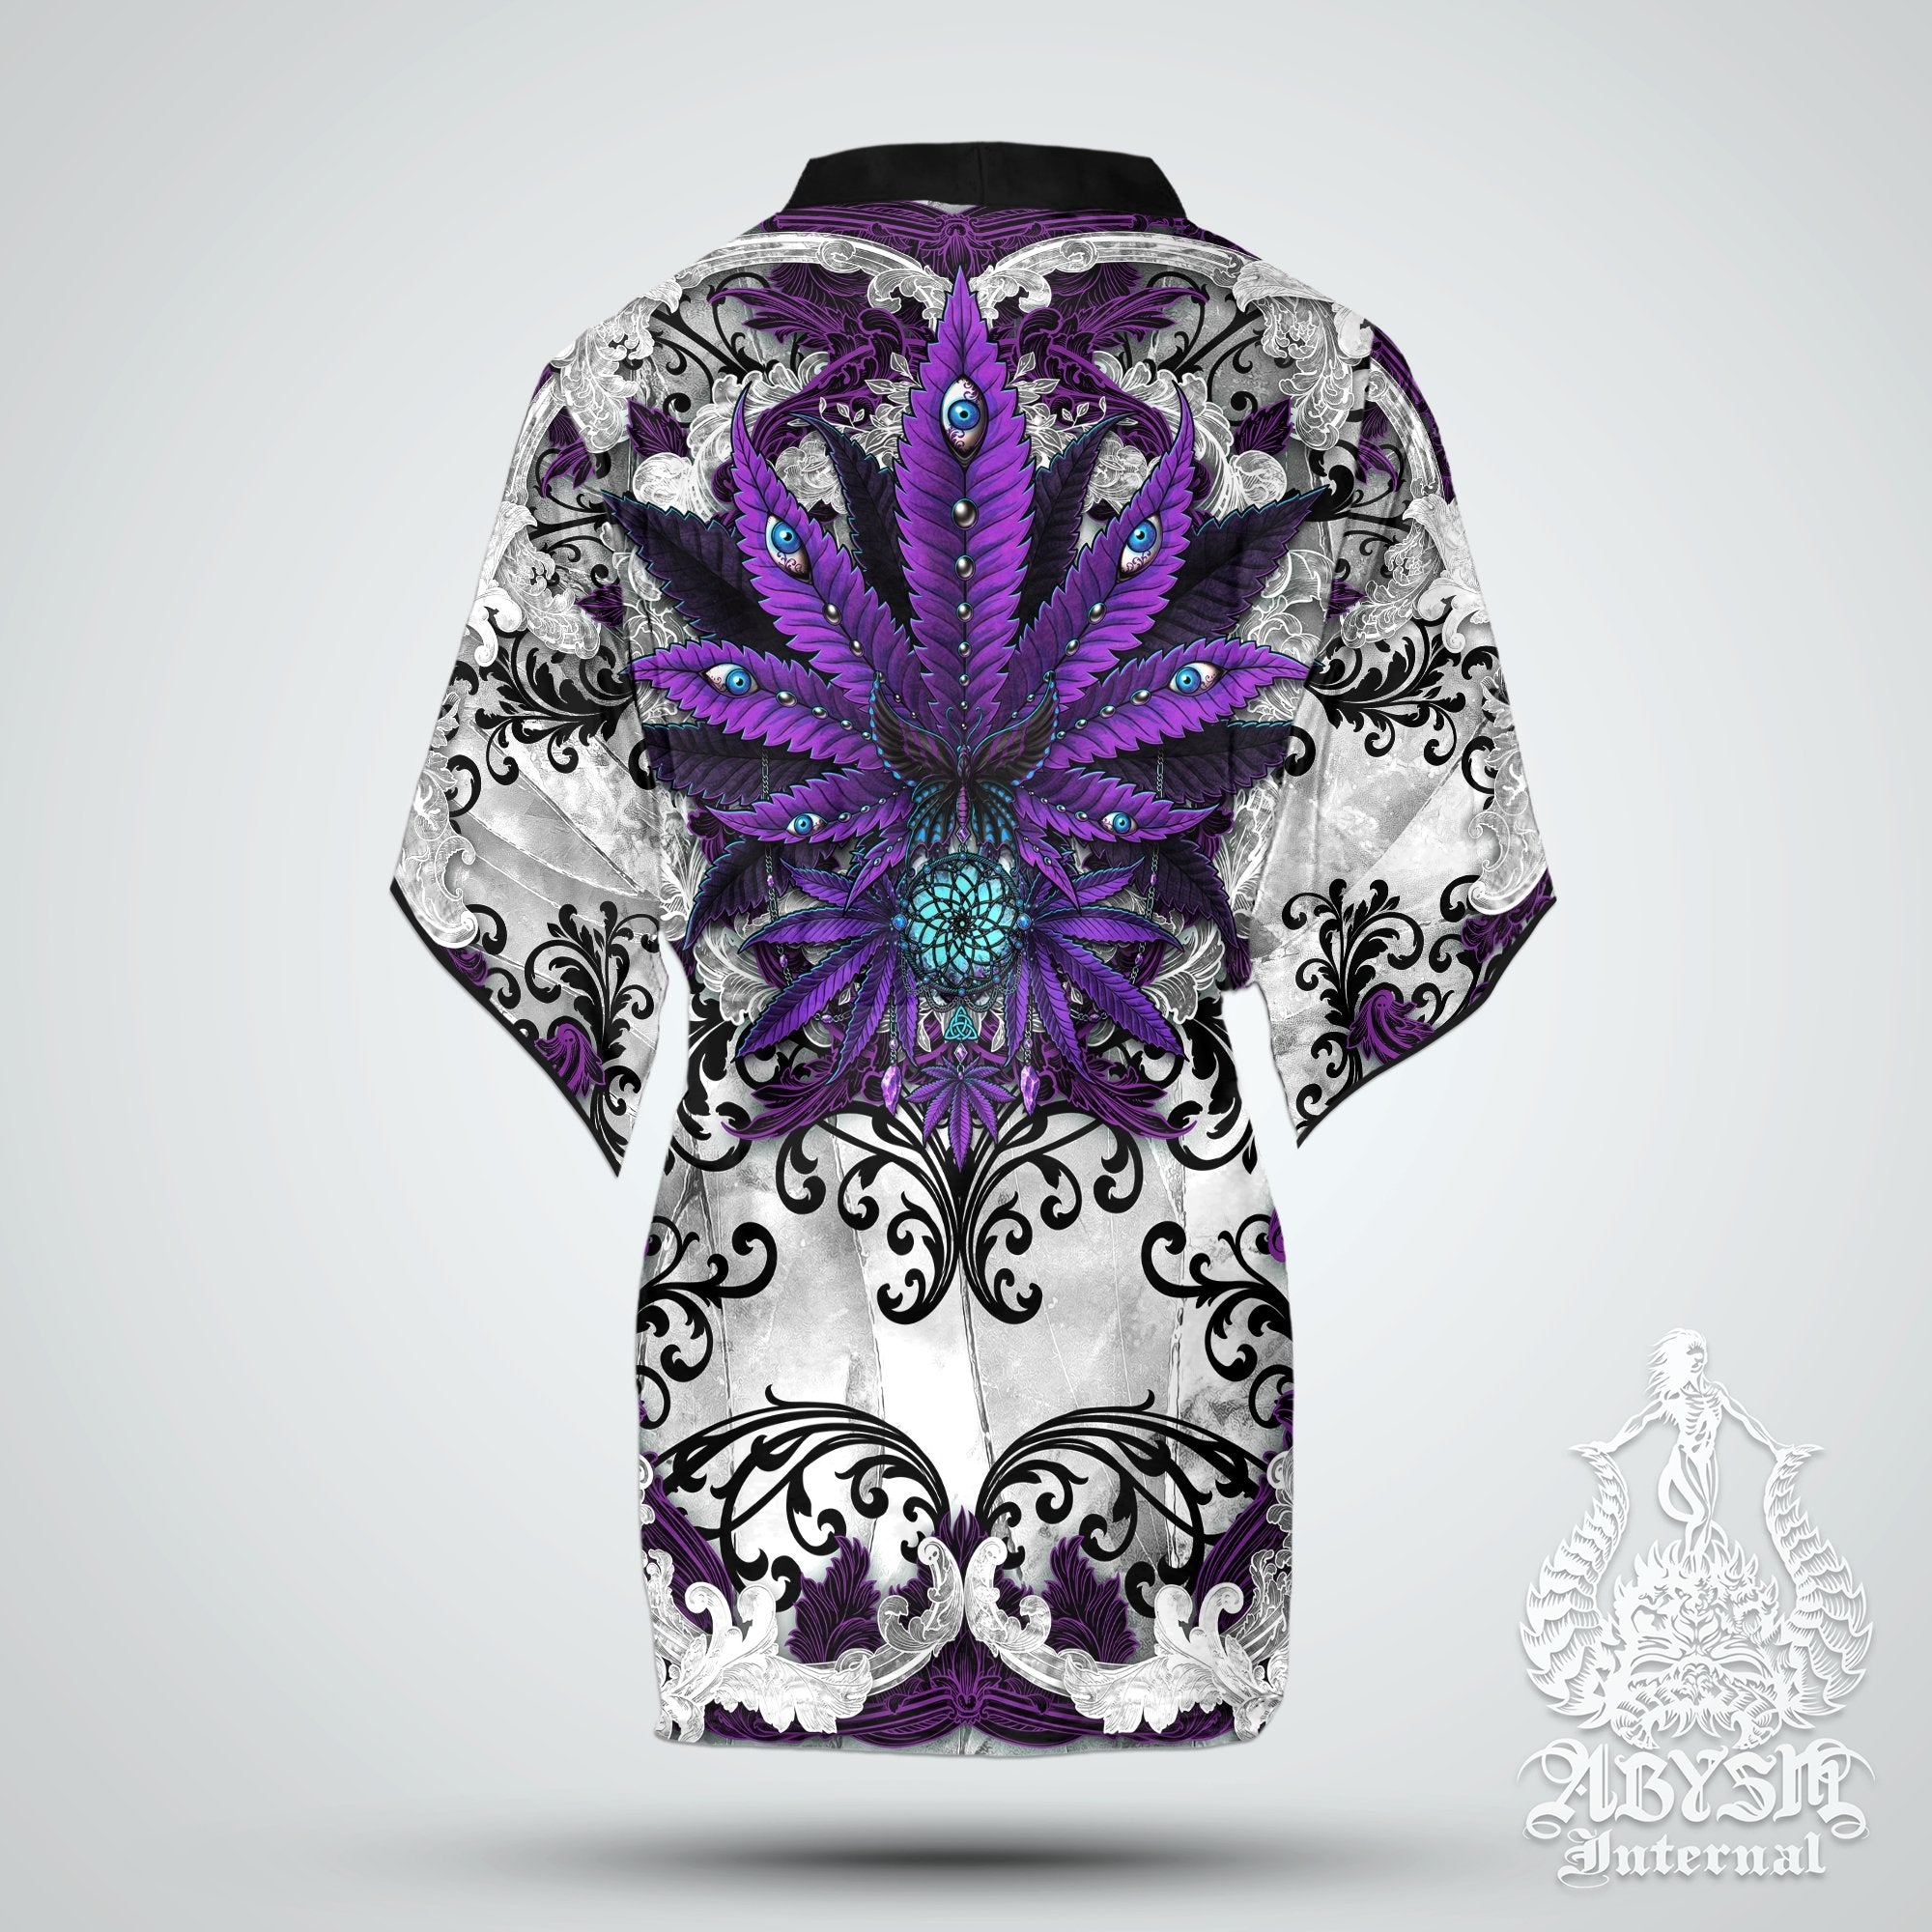 Weed Cover Up, Cannabis Outfit, Party Kimono, White Goth Summer Festival Robe, 420 Gift, Alternative Clothing, Unisex - Purple Marijuana - Abysm Internal